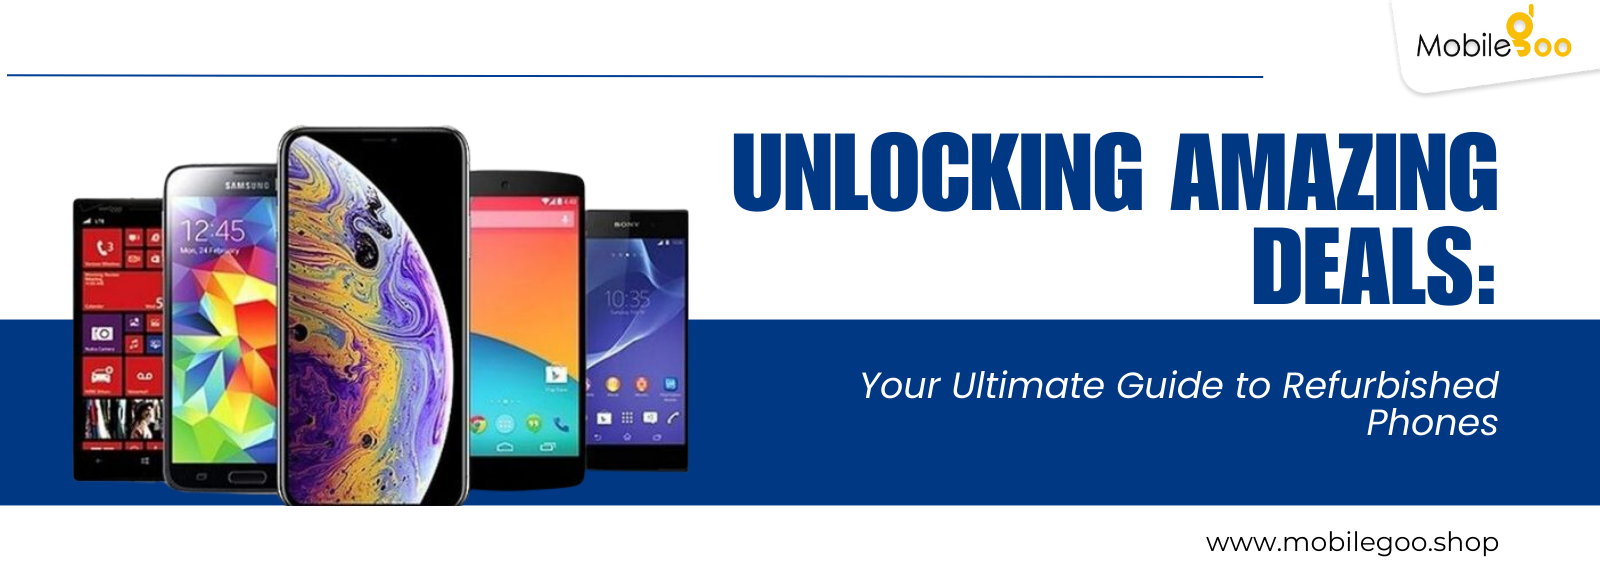 Unlocking Amazing Deals: Your Ultimate Guide to Refurbished Phones